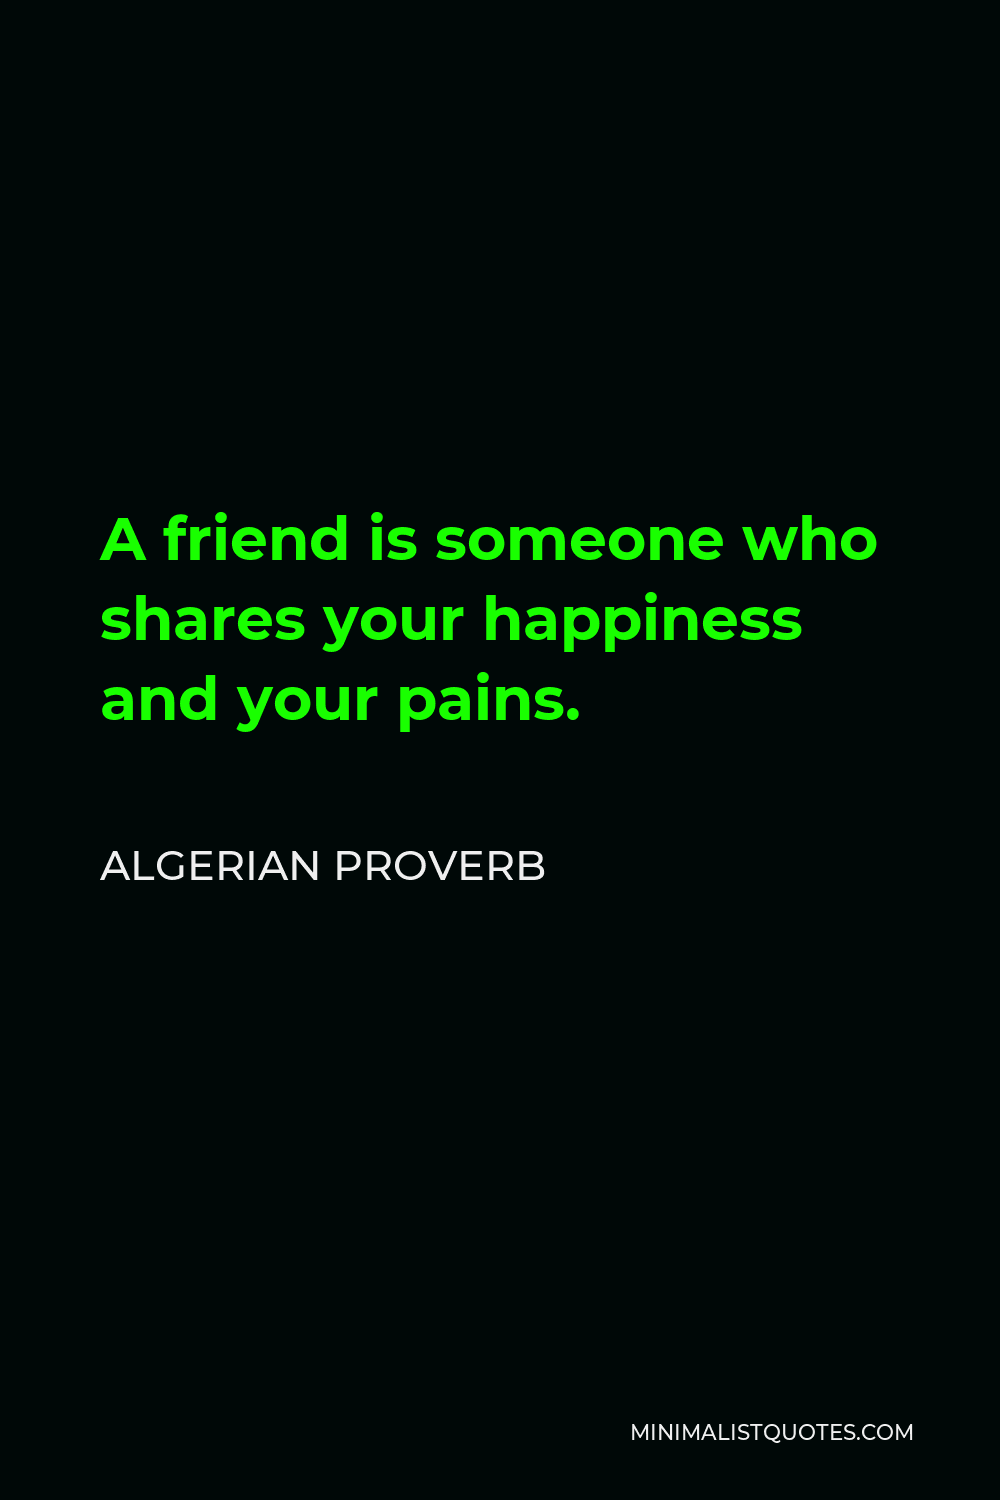 Algerian Proverb Quote - A friend is someone who shares your happiness and your pains.